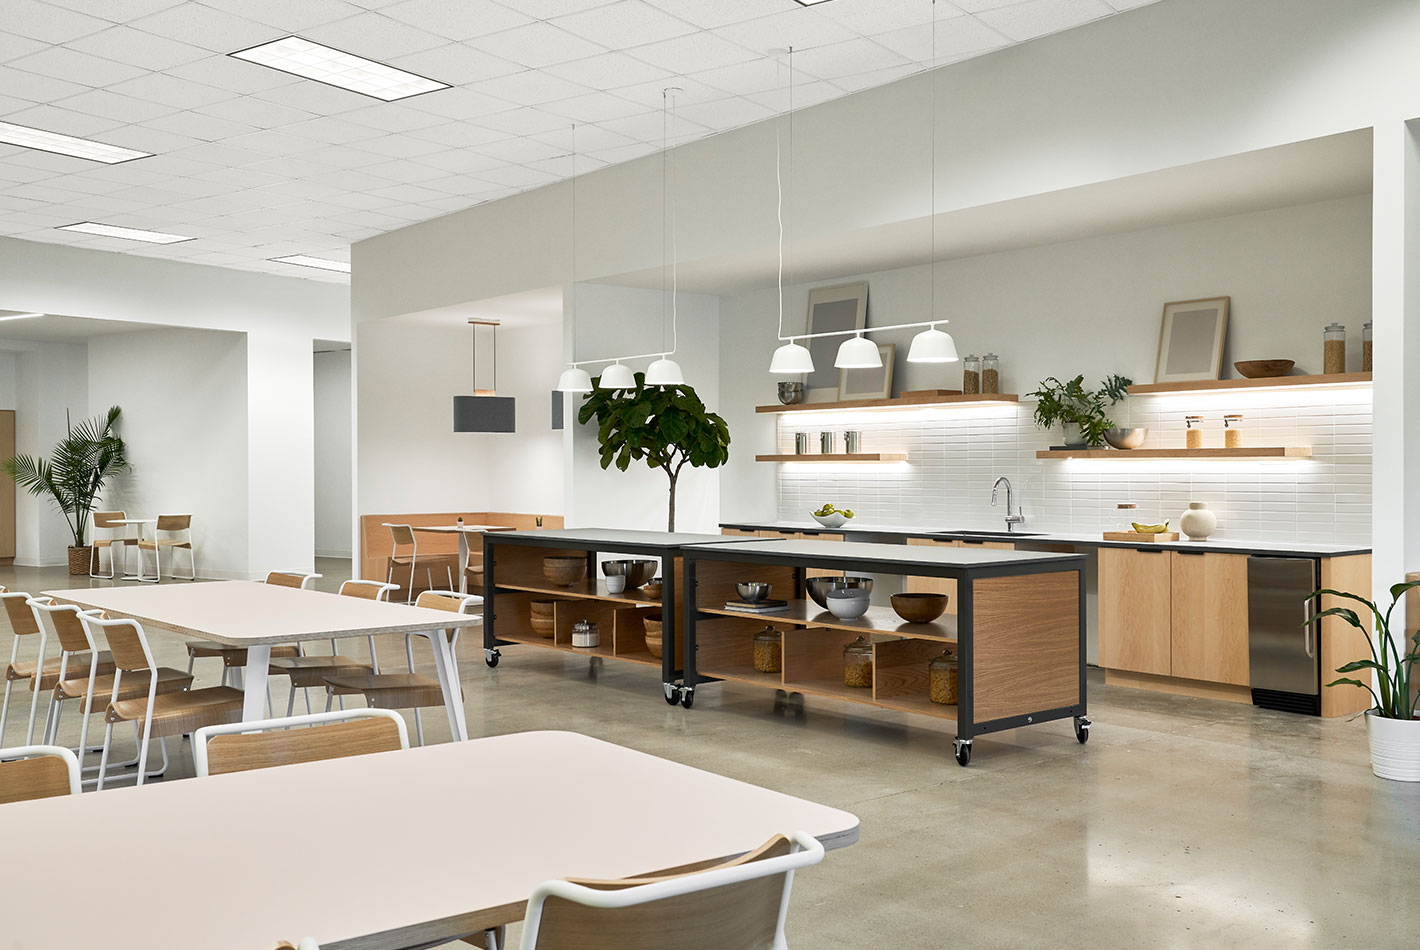 An expansive cafeteria area at Postmates Headquarters has counter space and sink near a painted white brick wall. Communal tables and chairs provide seating